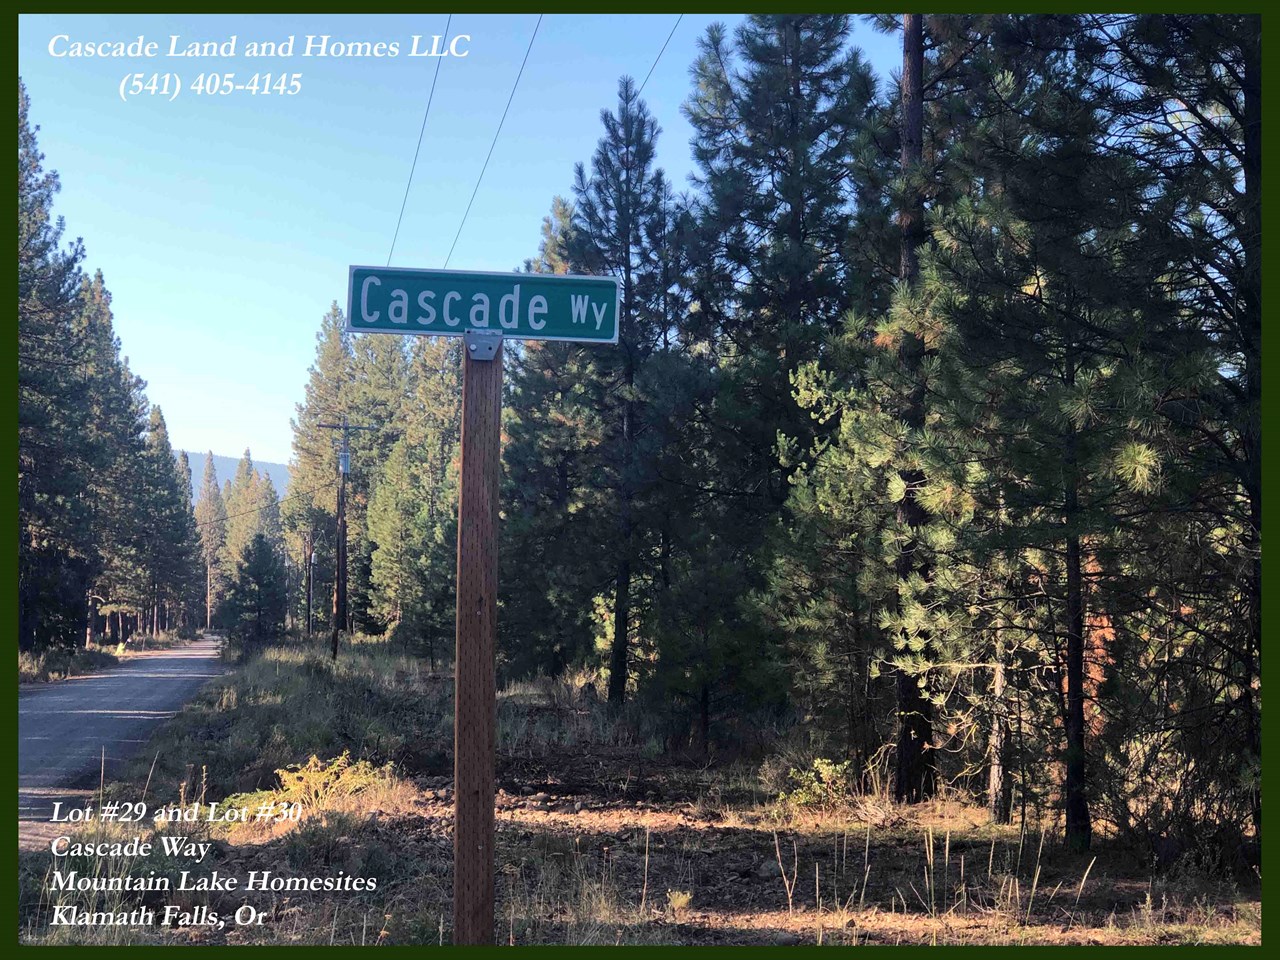 the property is very easy to locate on cascade way, the roads are marked and easy to travel. gorgeous pine trees line the roadways and hillsides that surround the subdivision, it has a very alpine feeling.